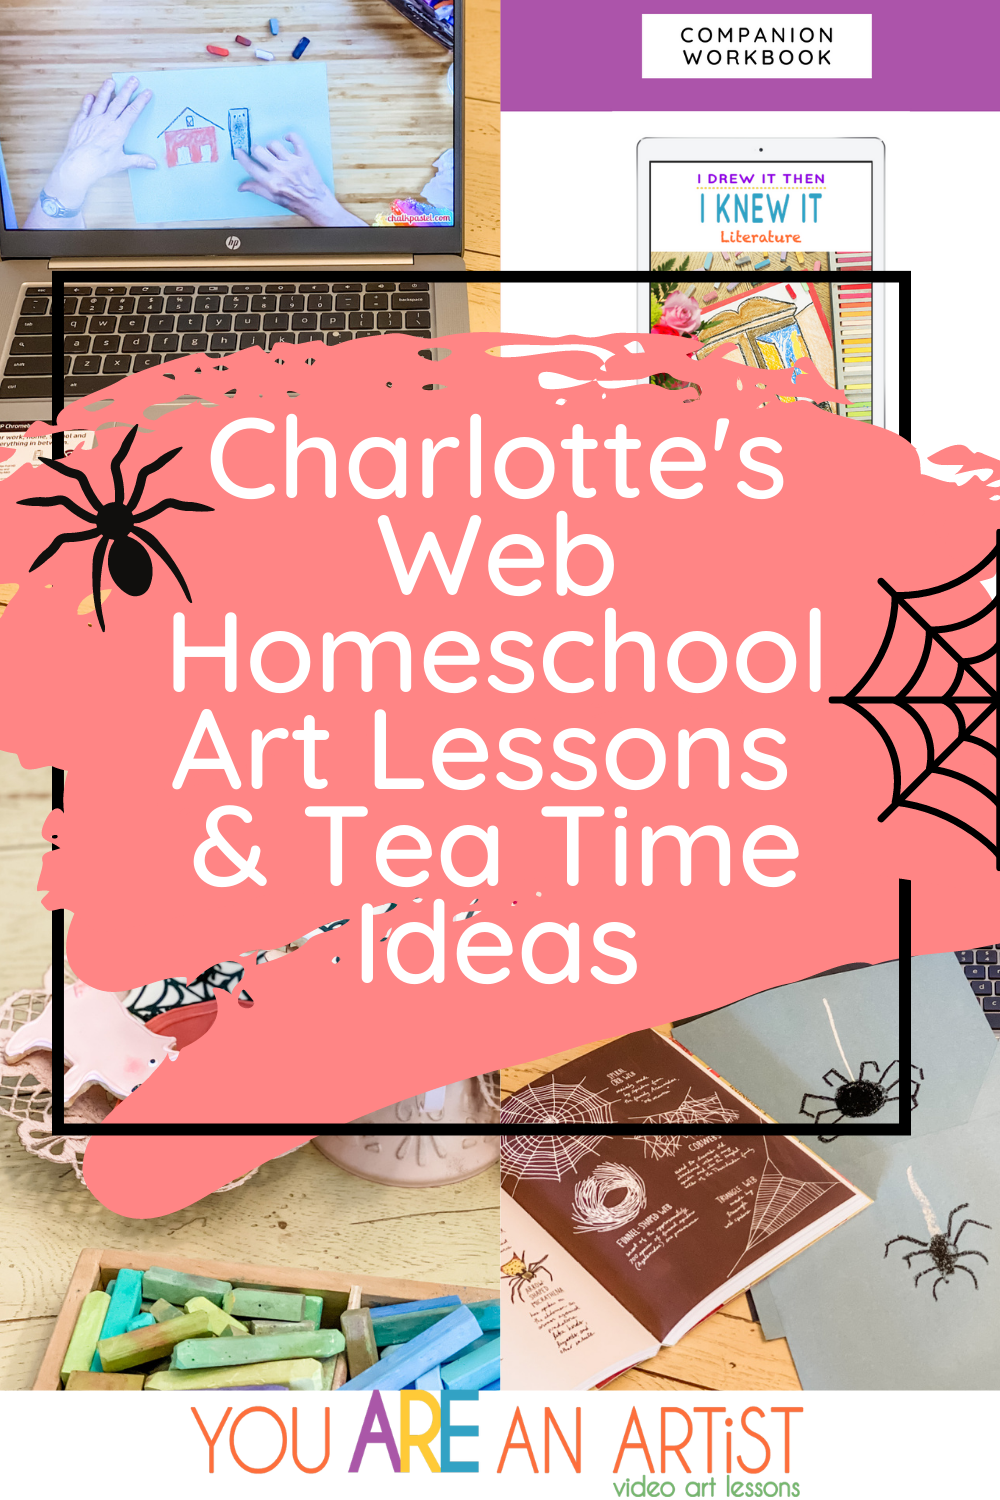 We have some Terrific Charlotte's Web homeschool art lessons to help you make lasting memories with your children while creating together! #homeschoolart #onlineartlessons #charlottesweb #booksforkids #charlotteswebart